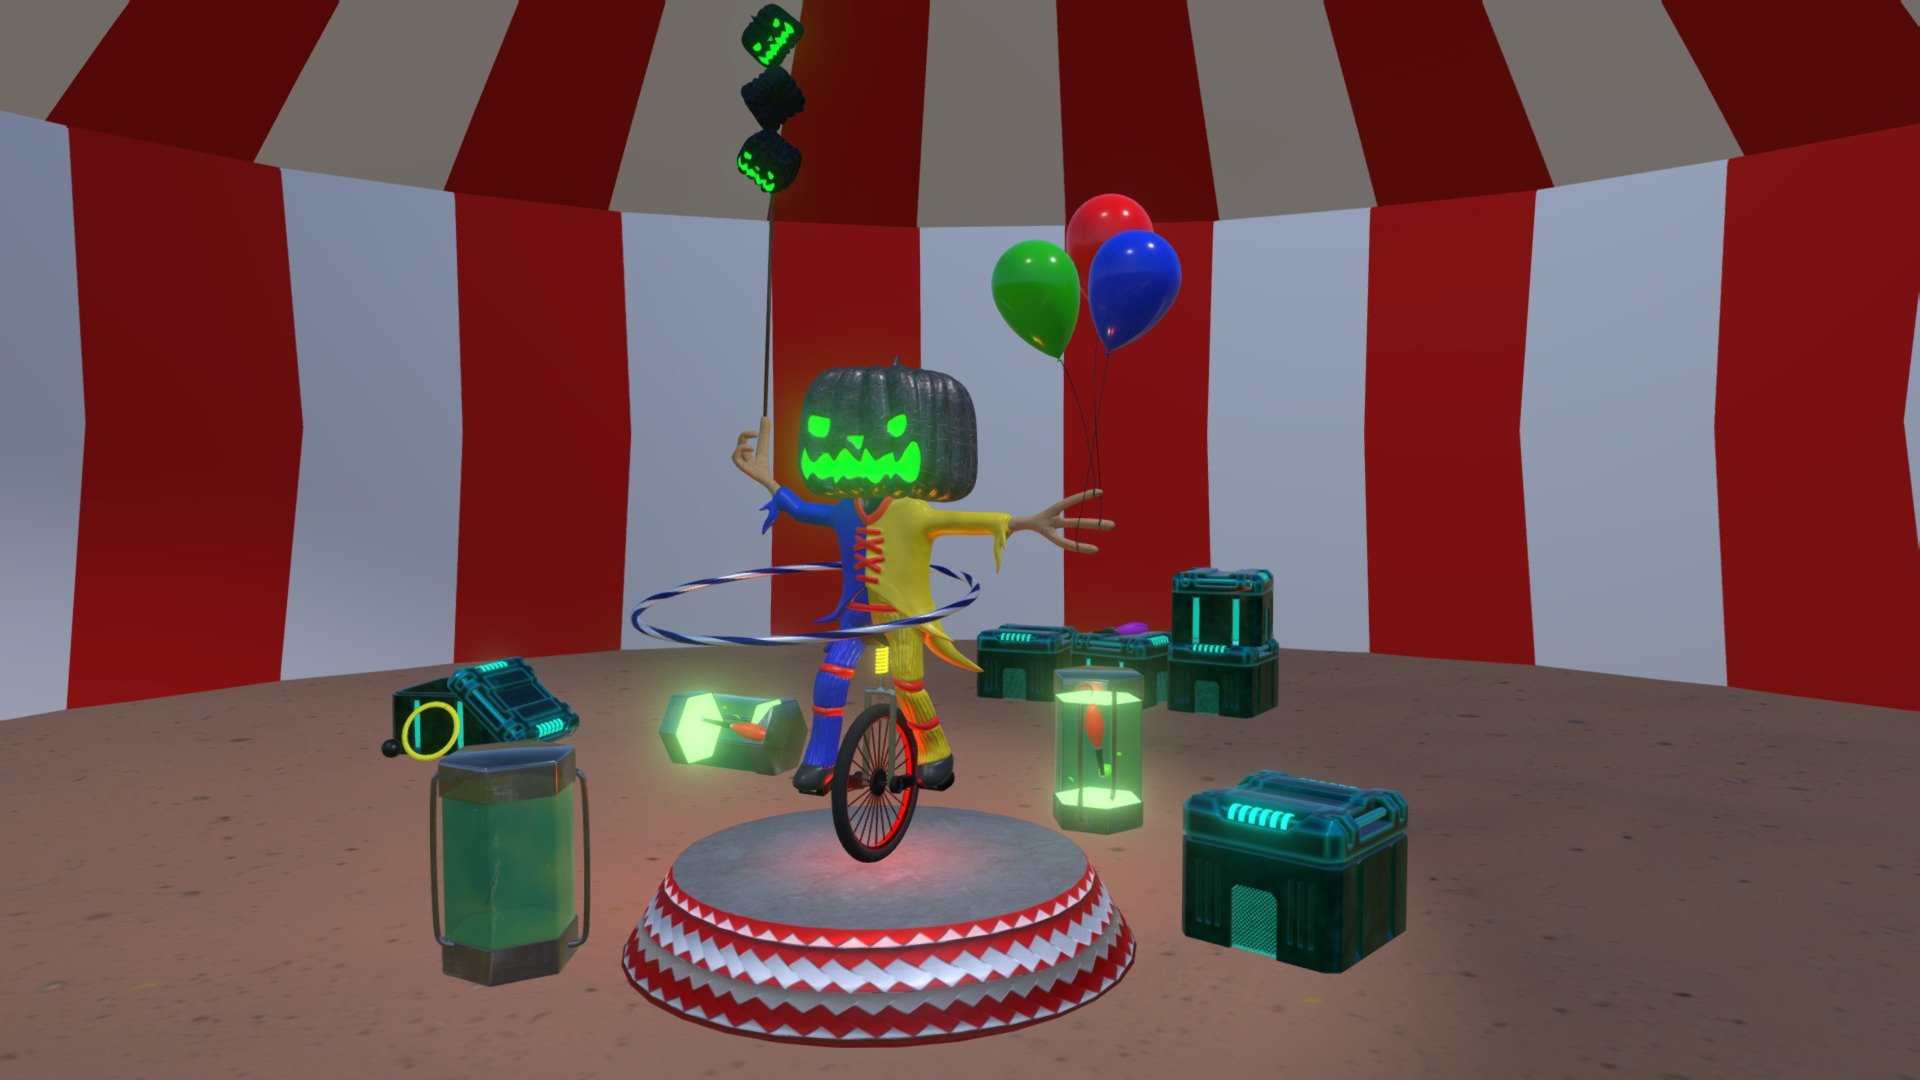 A sci-fi circus scene.
I don't know why the opacity doesn't work well, but you can imagine it.

Hope you like it 3d model